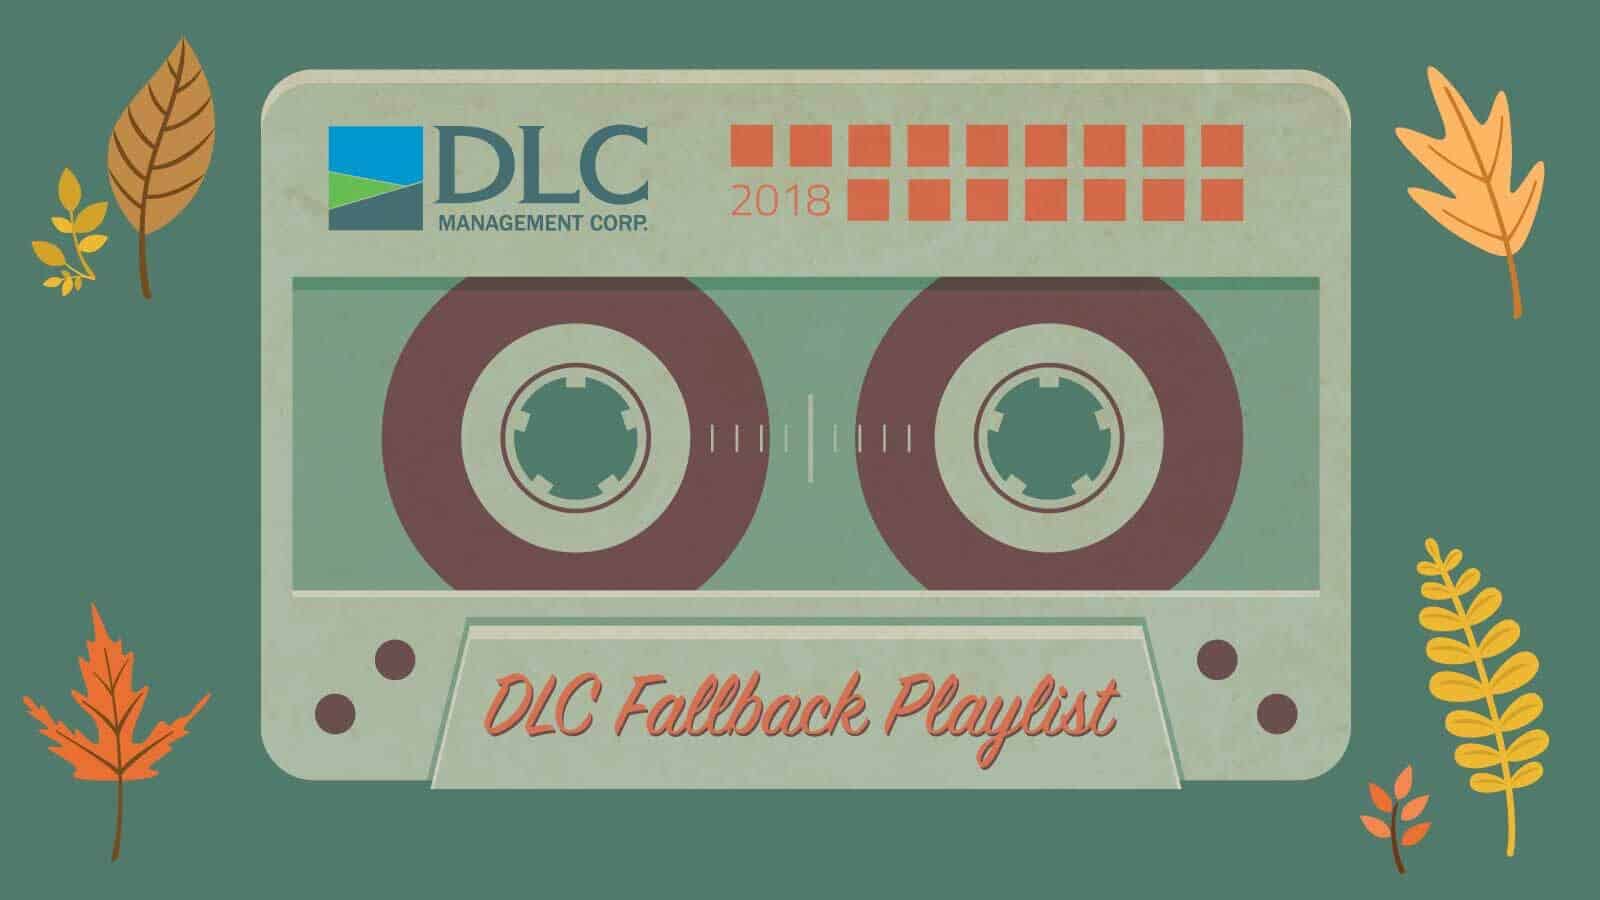 Cassette tape graphic labeled "DLC Fallback Playlist" with autumn leaves in the background